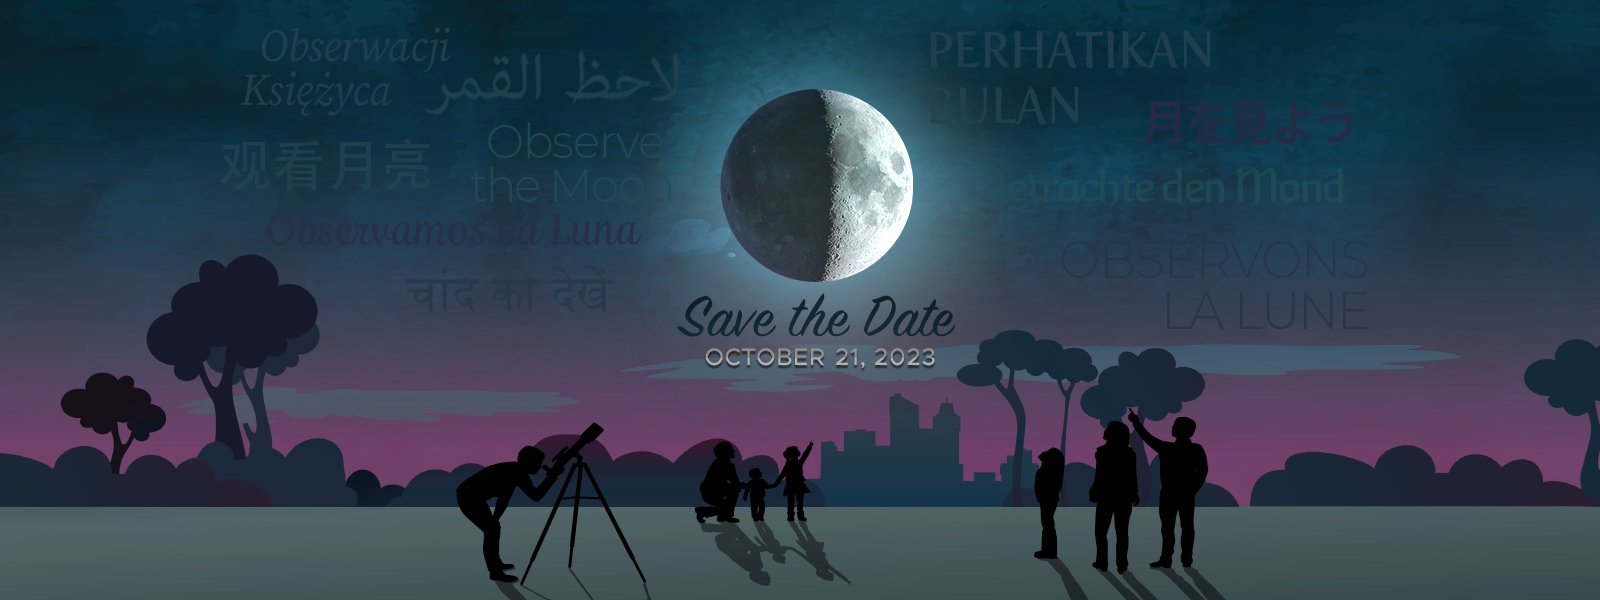 slide 2 - Save the Date card for International Observe the Moon Night on October 21, 2023